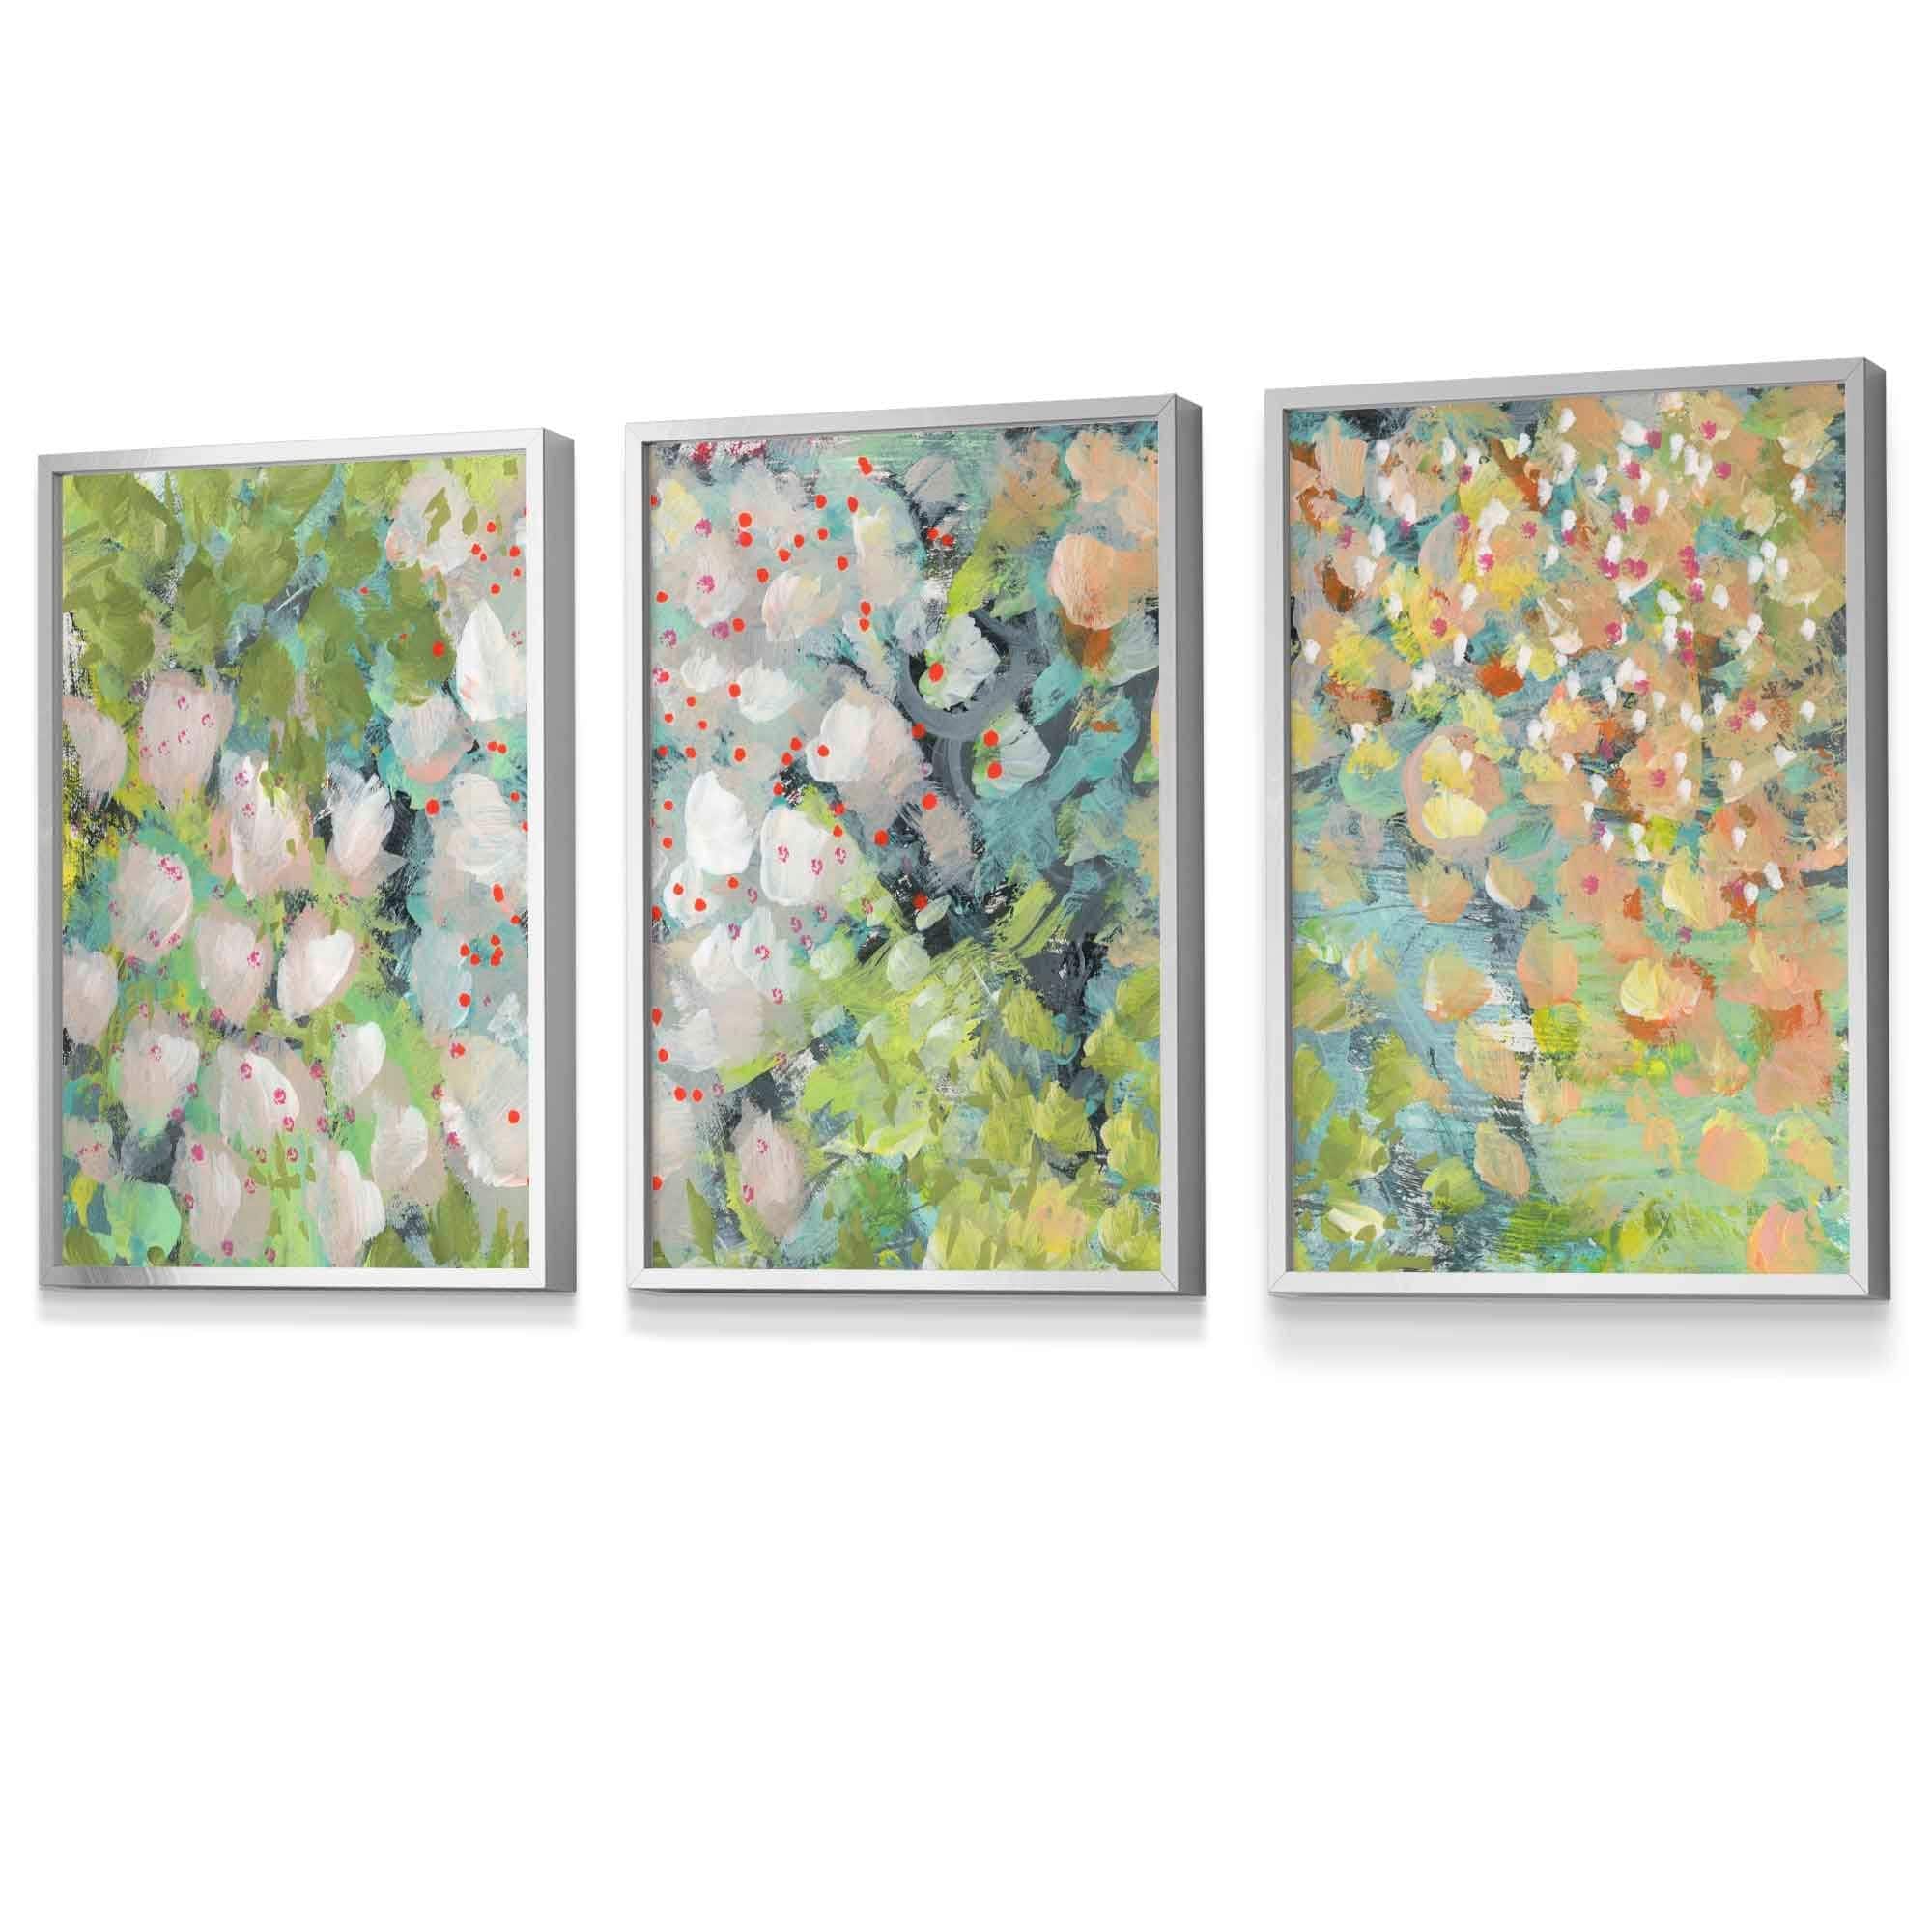 Set of 3 Abstract Cottage Garden Flowers in Green Wall Art Prints FRAMED Floral Art Prints / Posters